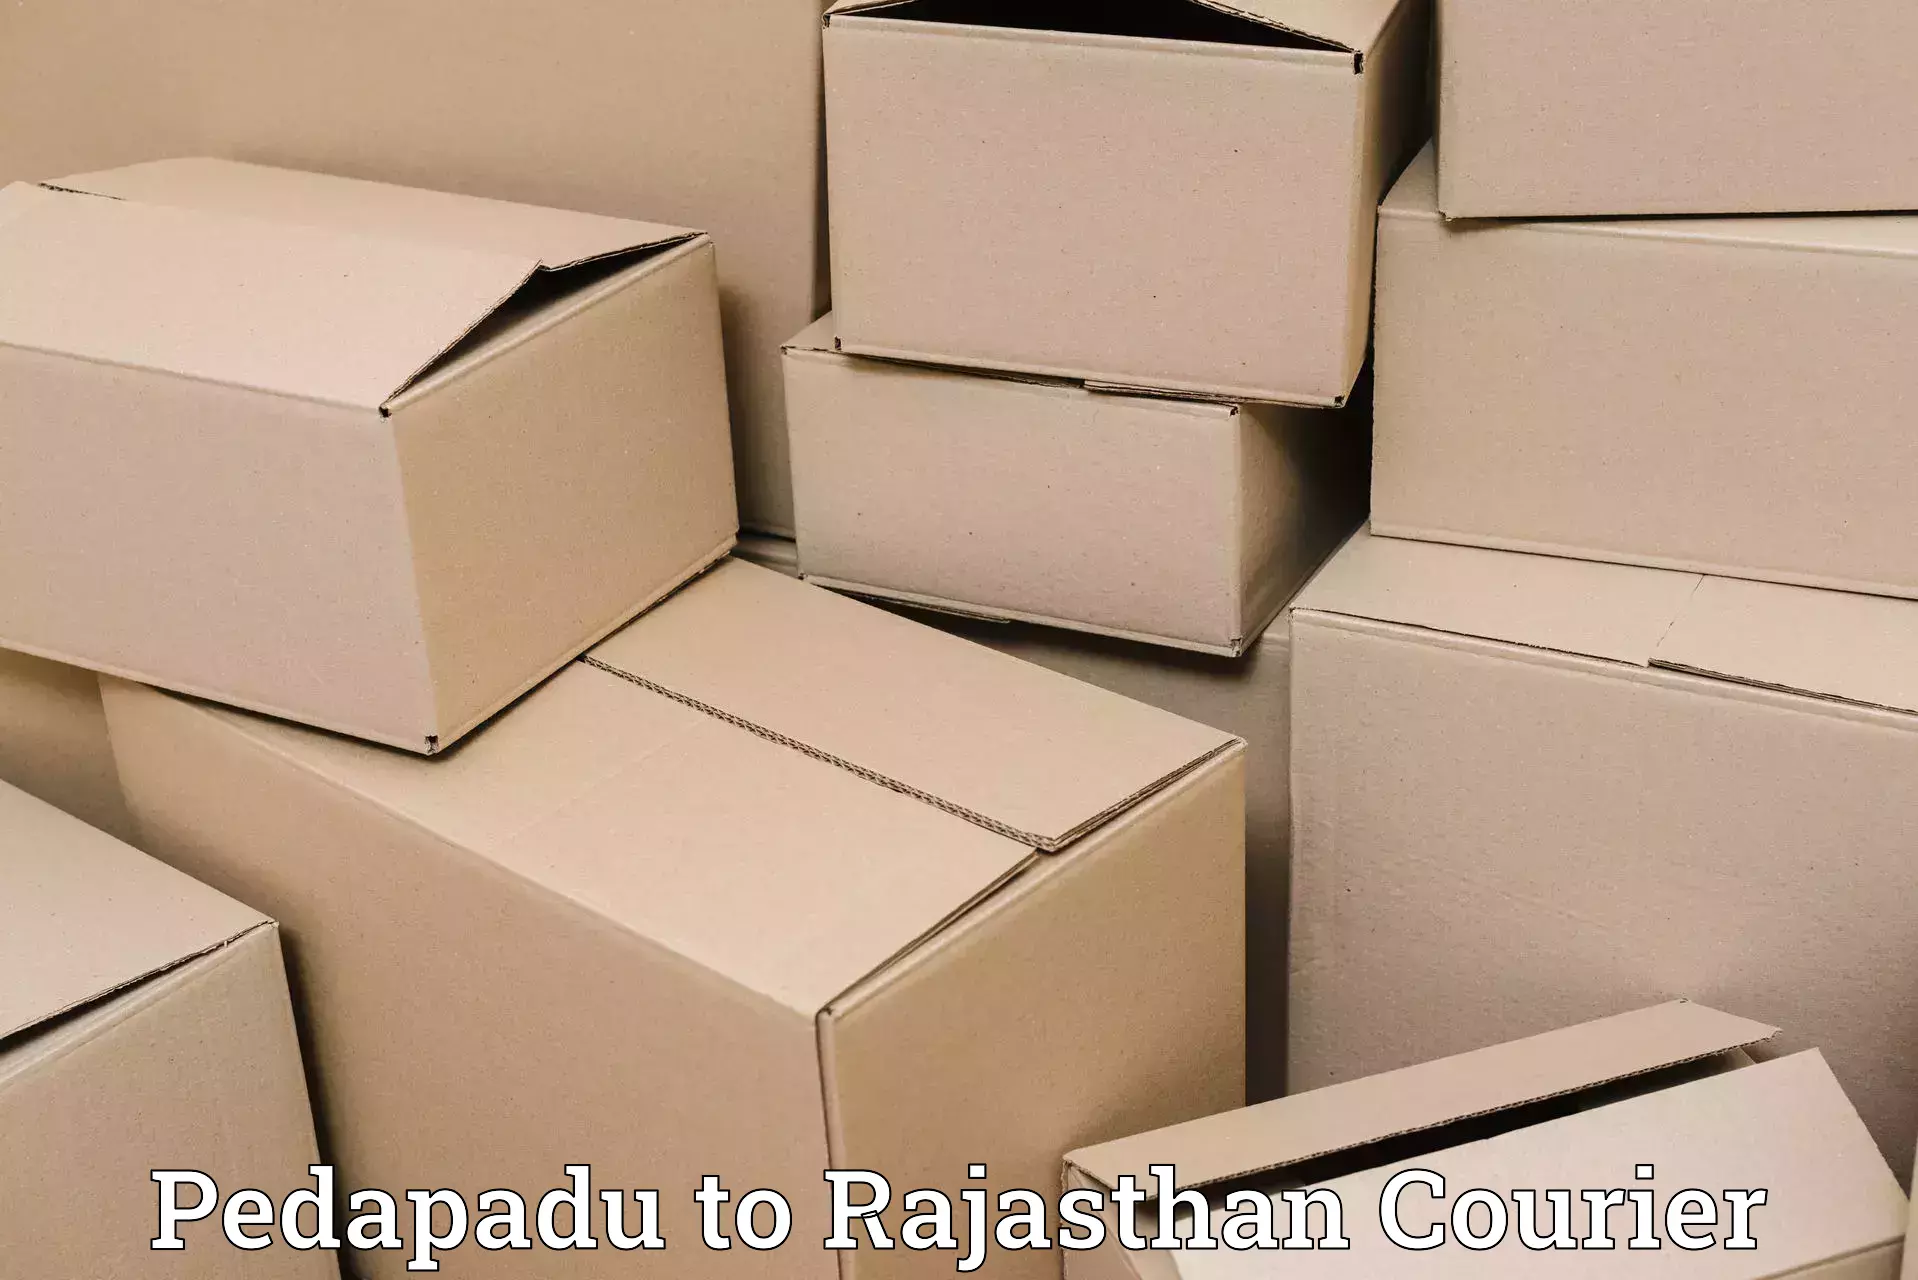 24-hour delivery options Pedapadu to Rajasthan